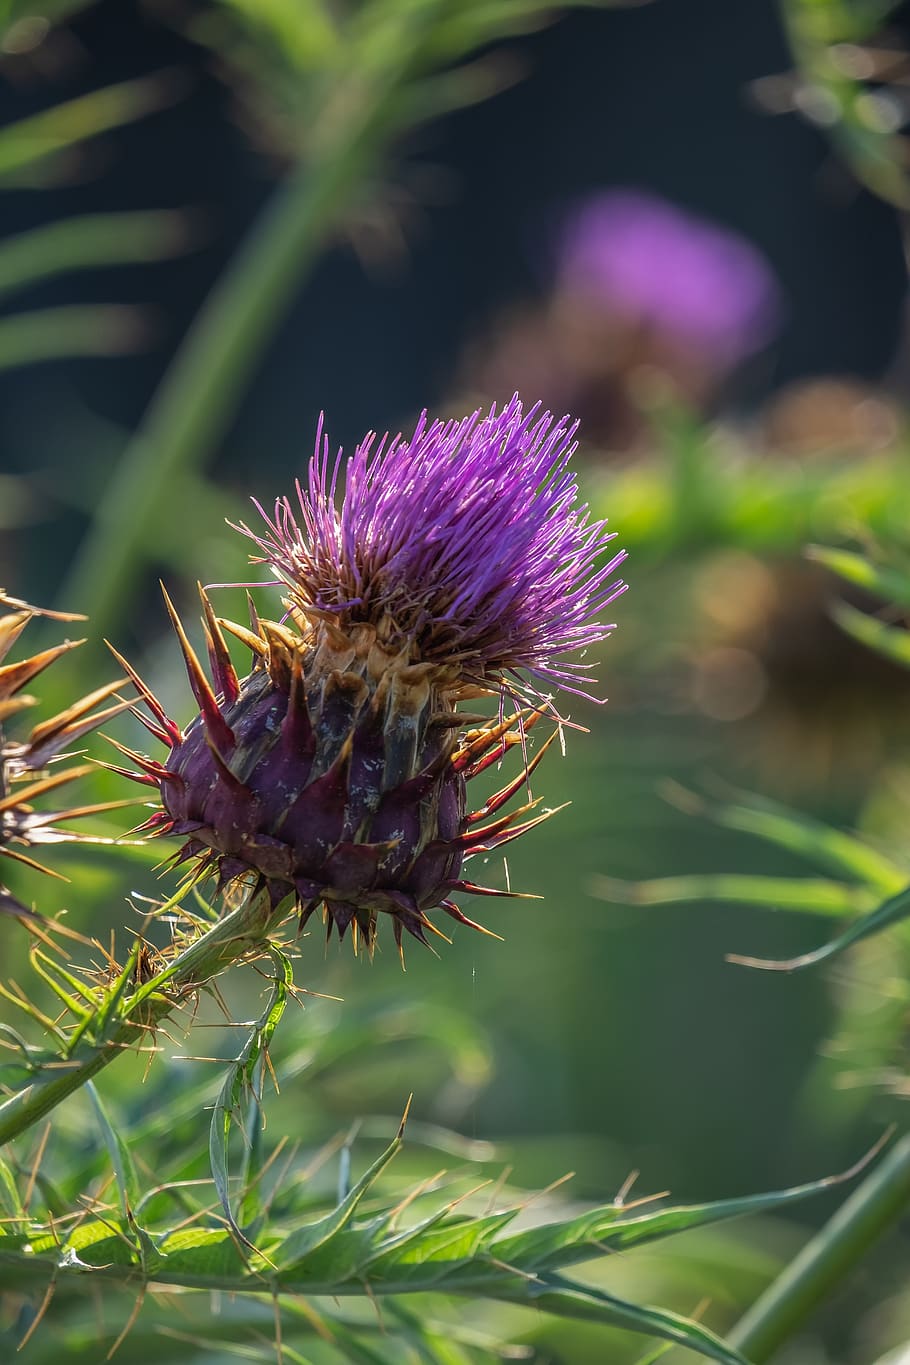 thistle, common donkey thistle, wool thistle, convulsive thistle, cancer thistle, prickly, flower, flora, blossom, bloom